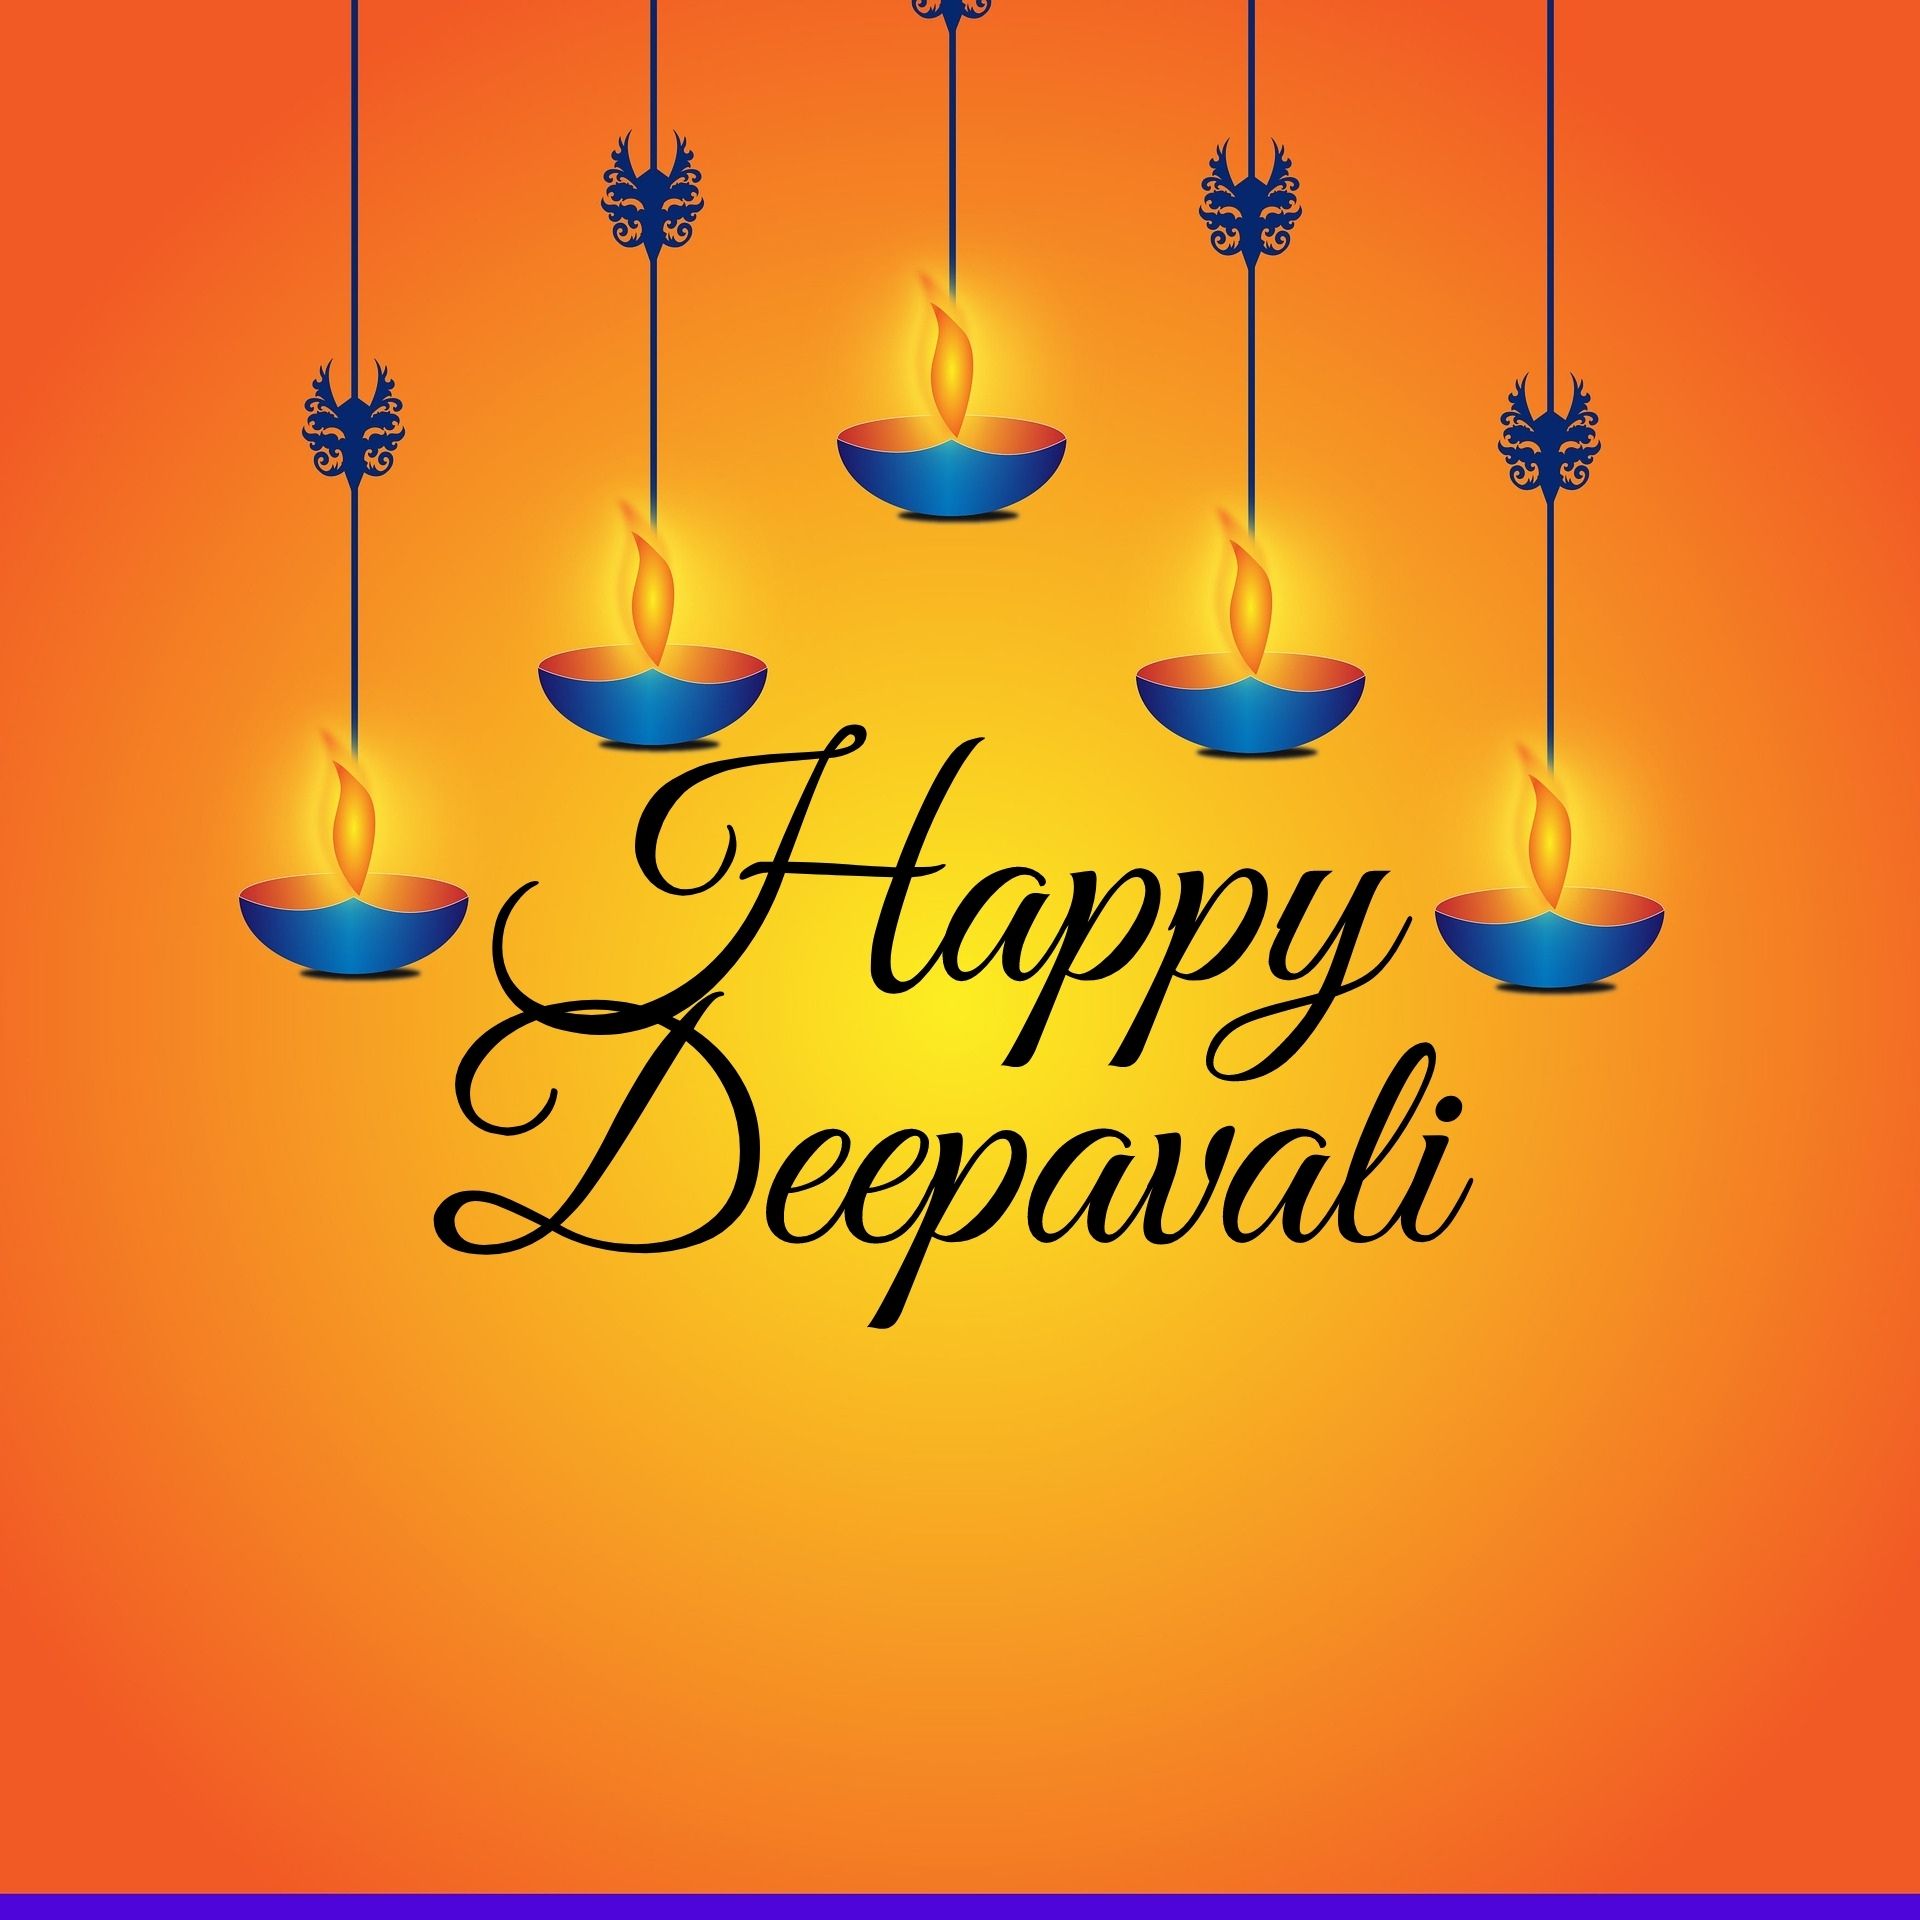 Happy Diwali Best Wishes Images Messages And Greetings To Wish | Hot ...